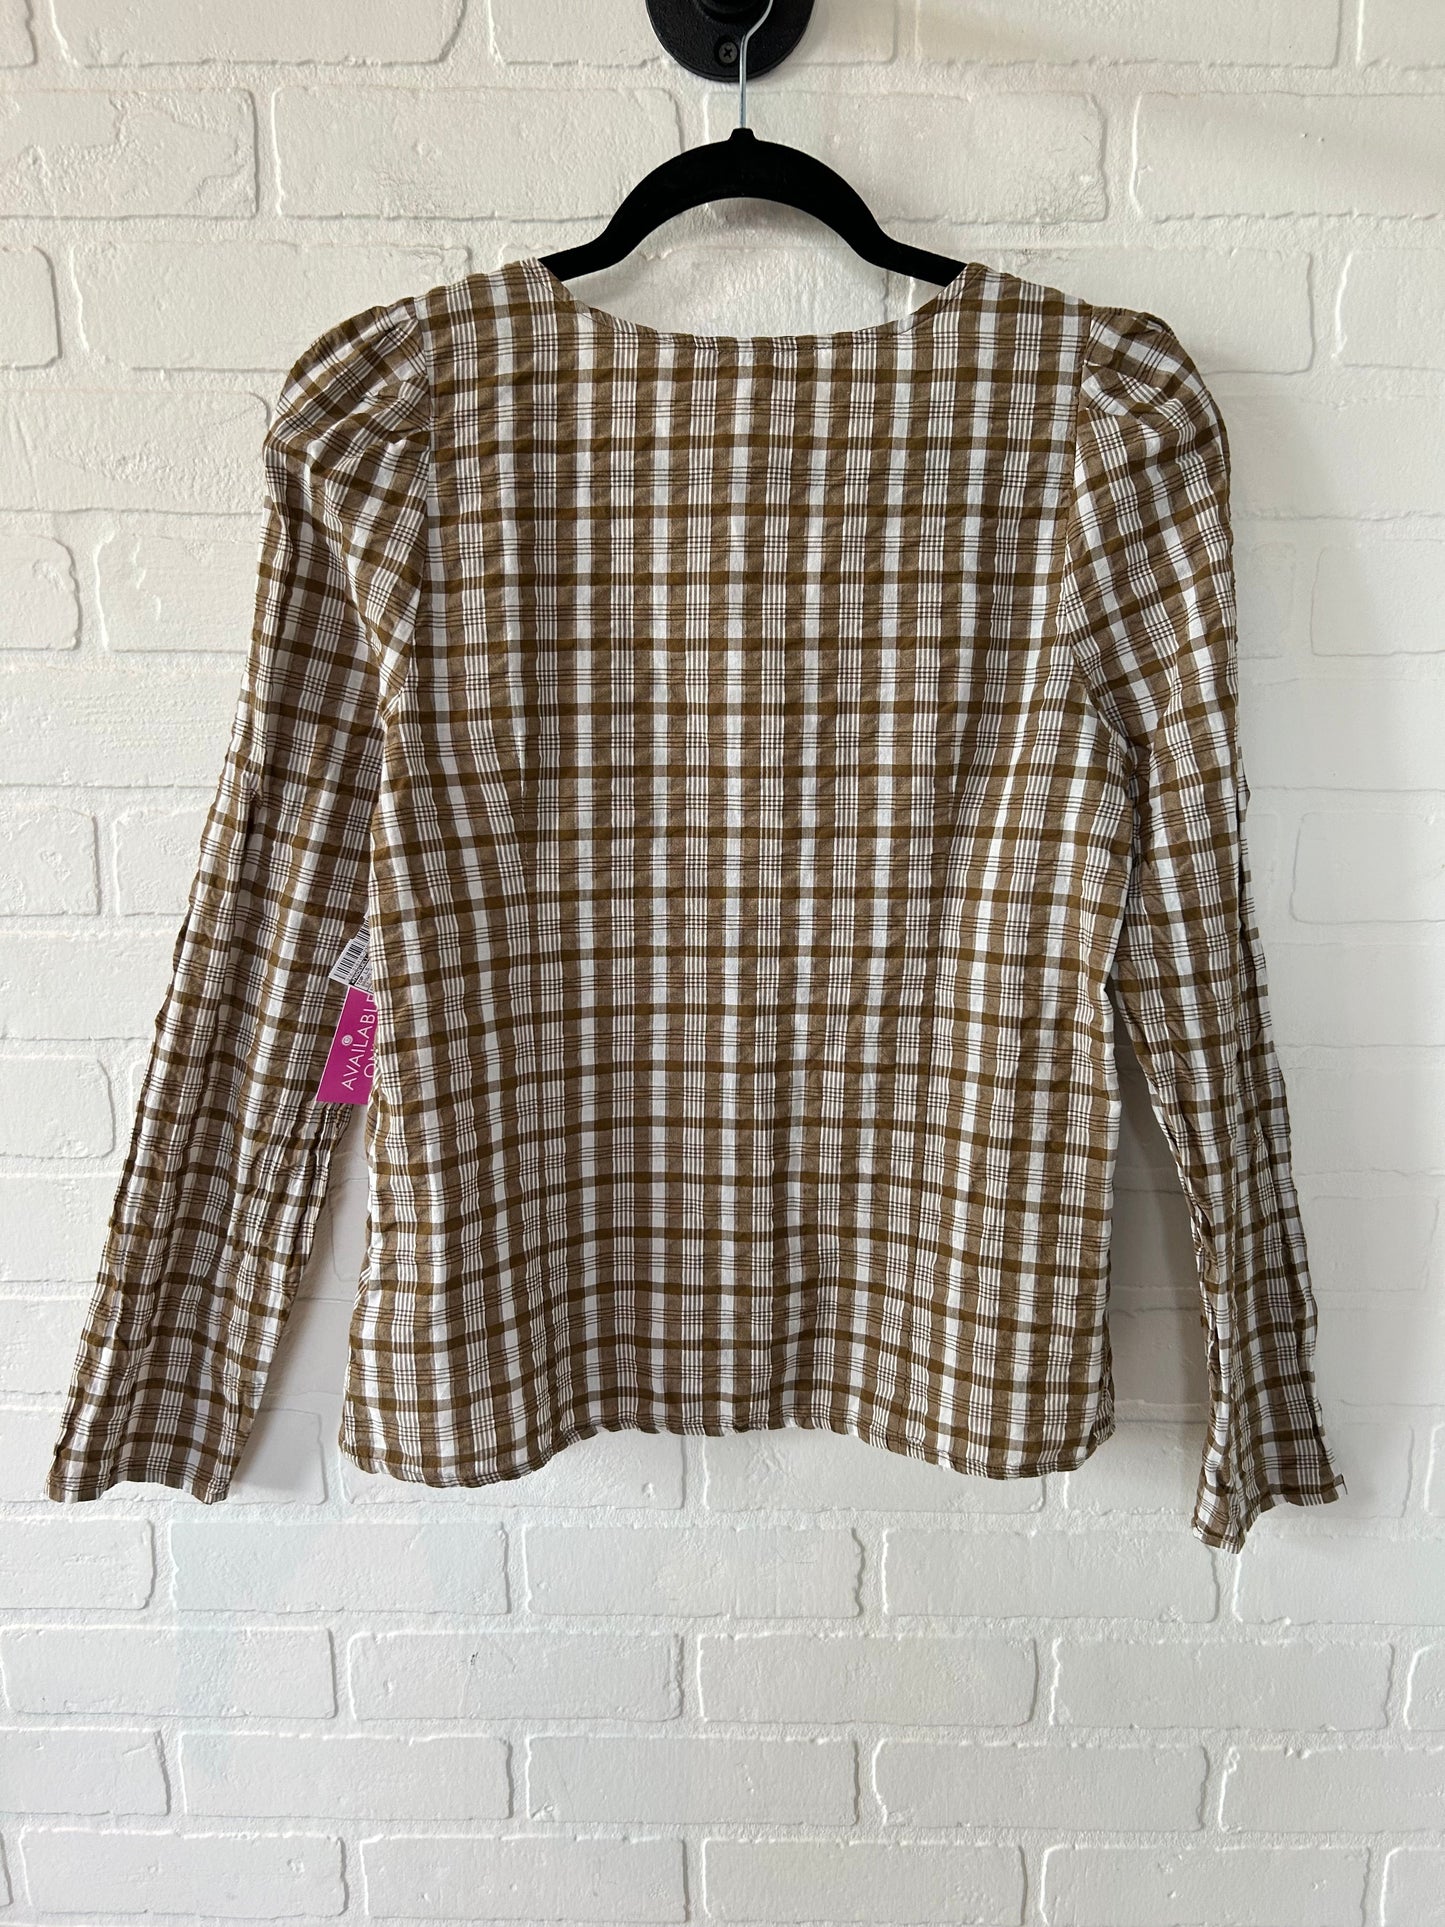 Brown & White Top Long Sleeve Madewell, Size S